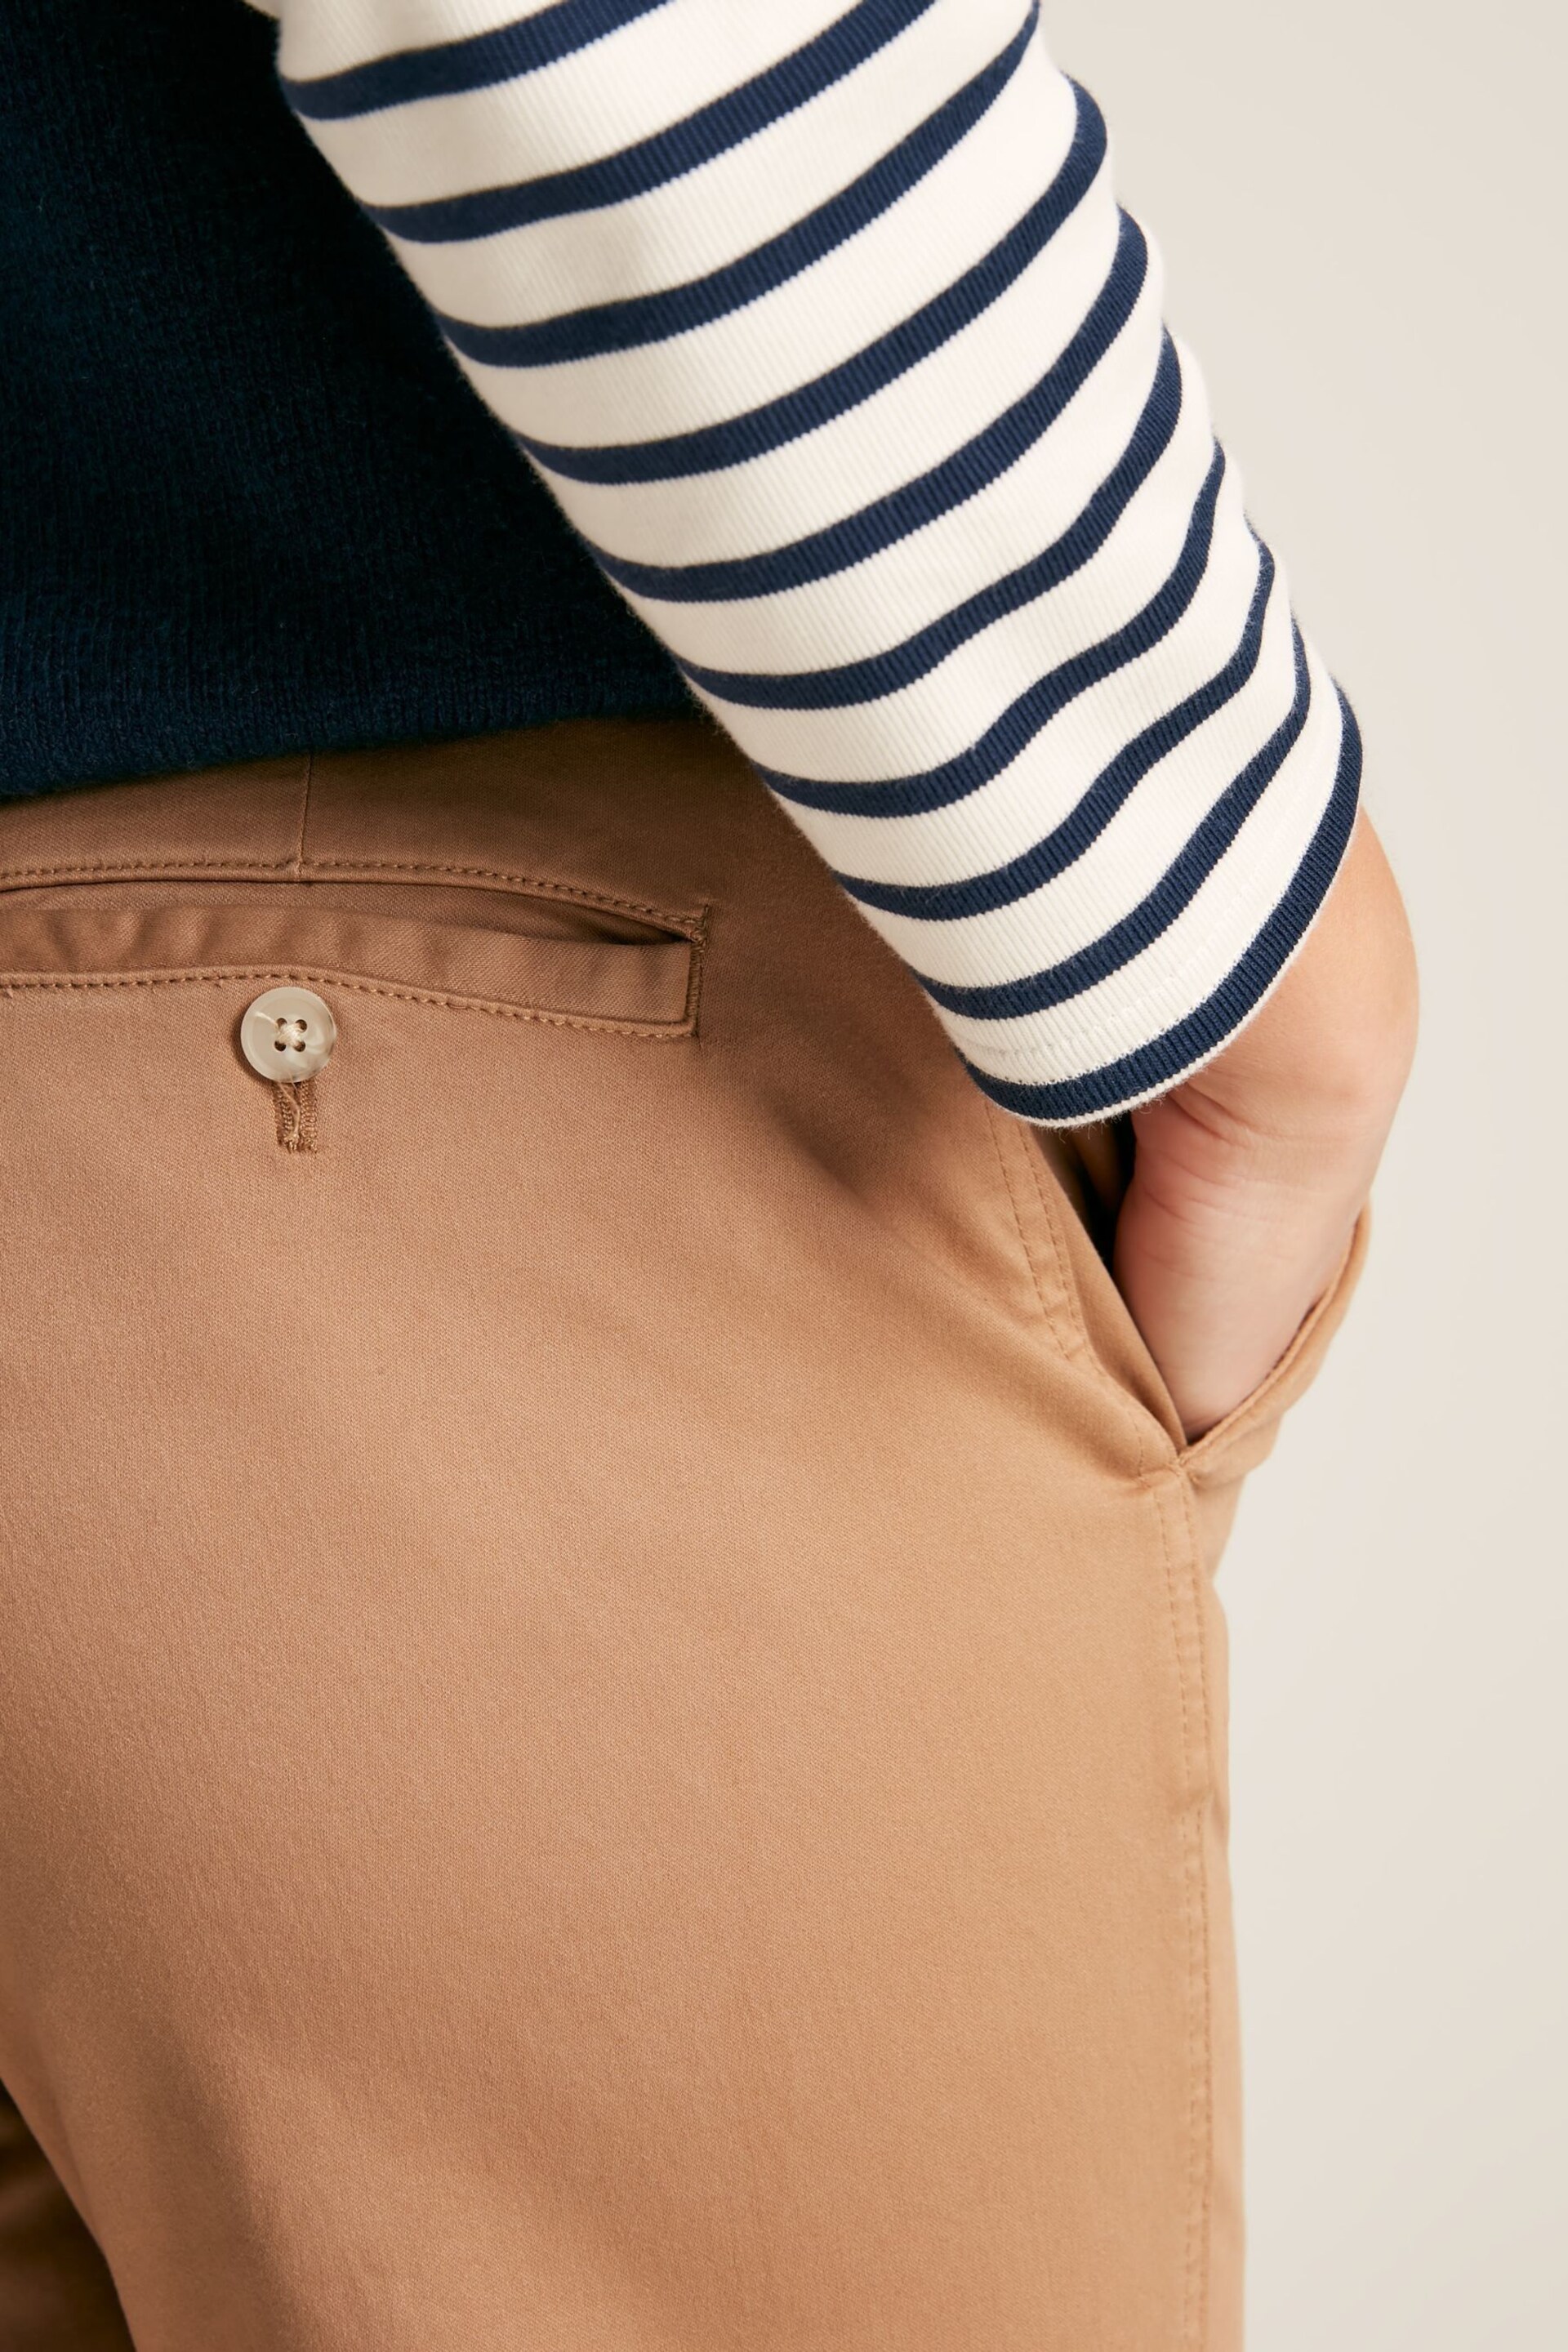 Joules Hesford Stone Chino Trousers - Image 5 of 7